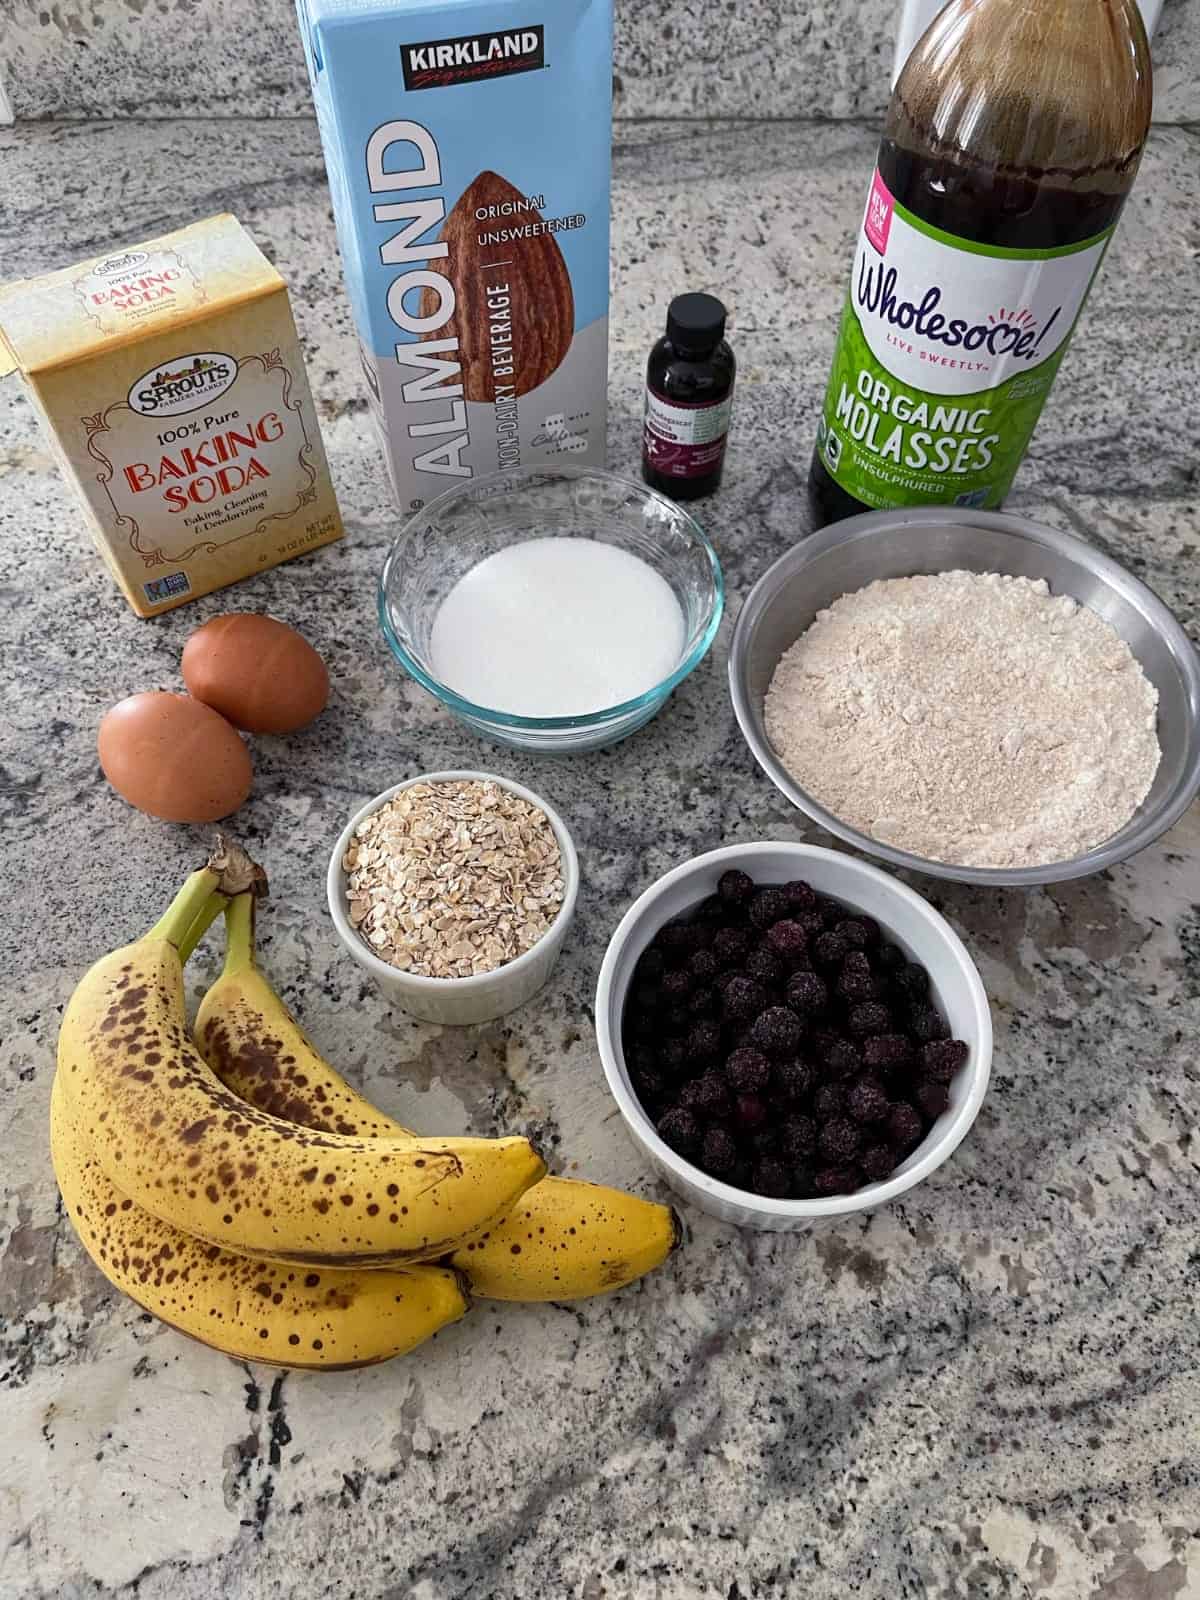 Ingredients for making blueberry banana bread including flour, blueberries, bananas, oats, eggs, molasses, sweetener and almond milk.